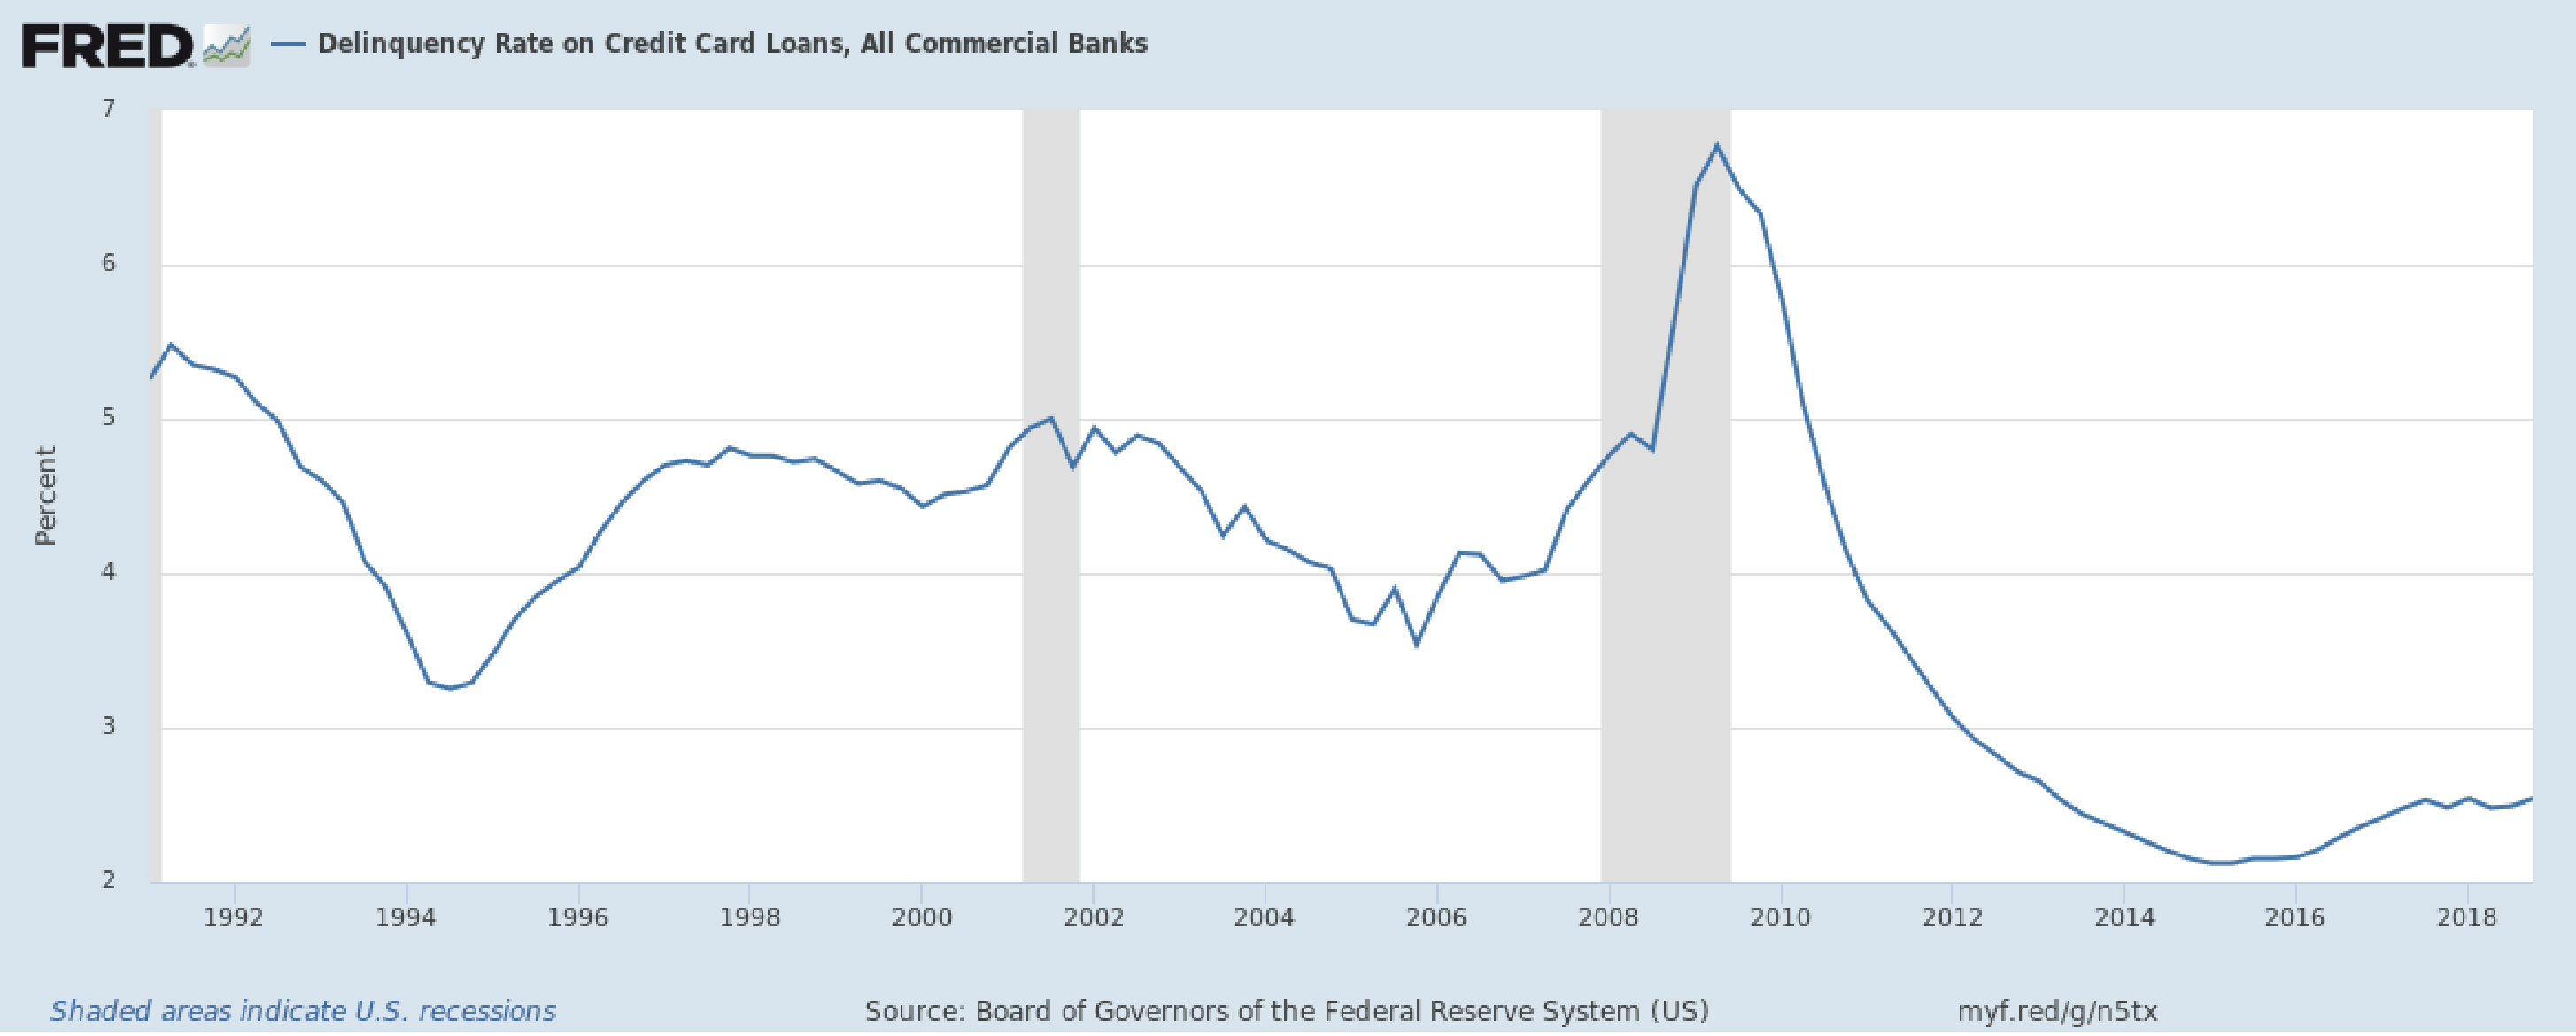 Percentage of balances ninety or more days past due: all commercial banks. Source: Board of Governors of the Federal Reserve System, available via the FRED database (Federal Reserve Bank of St Louis).